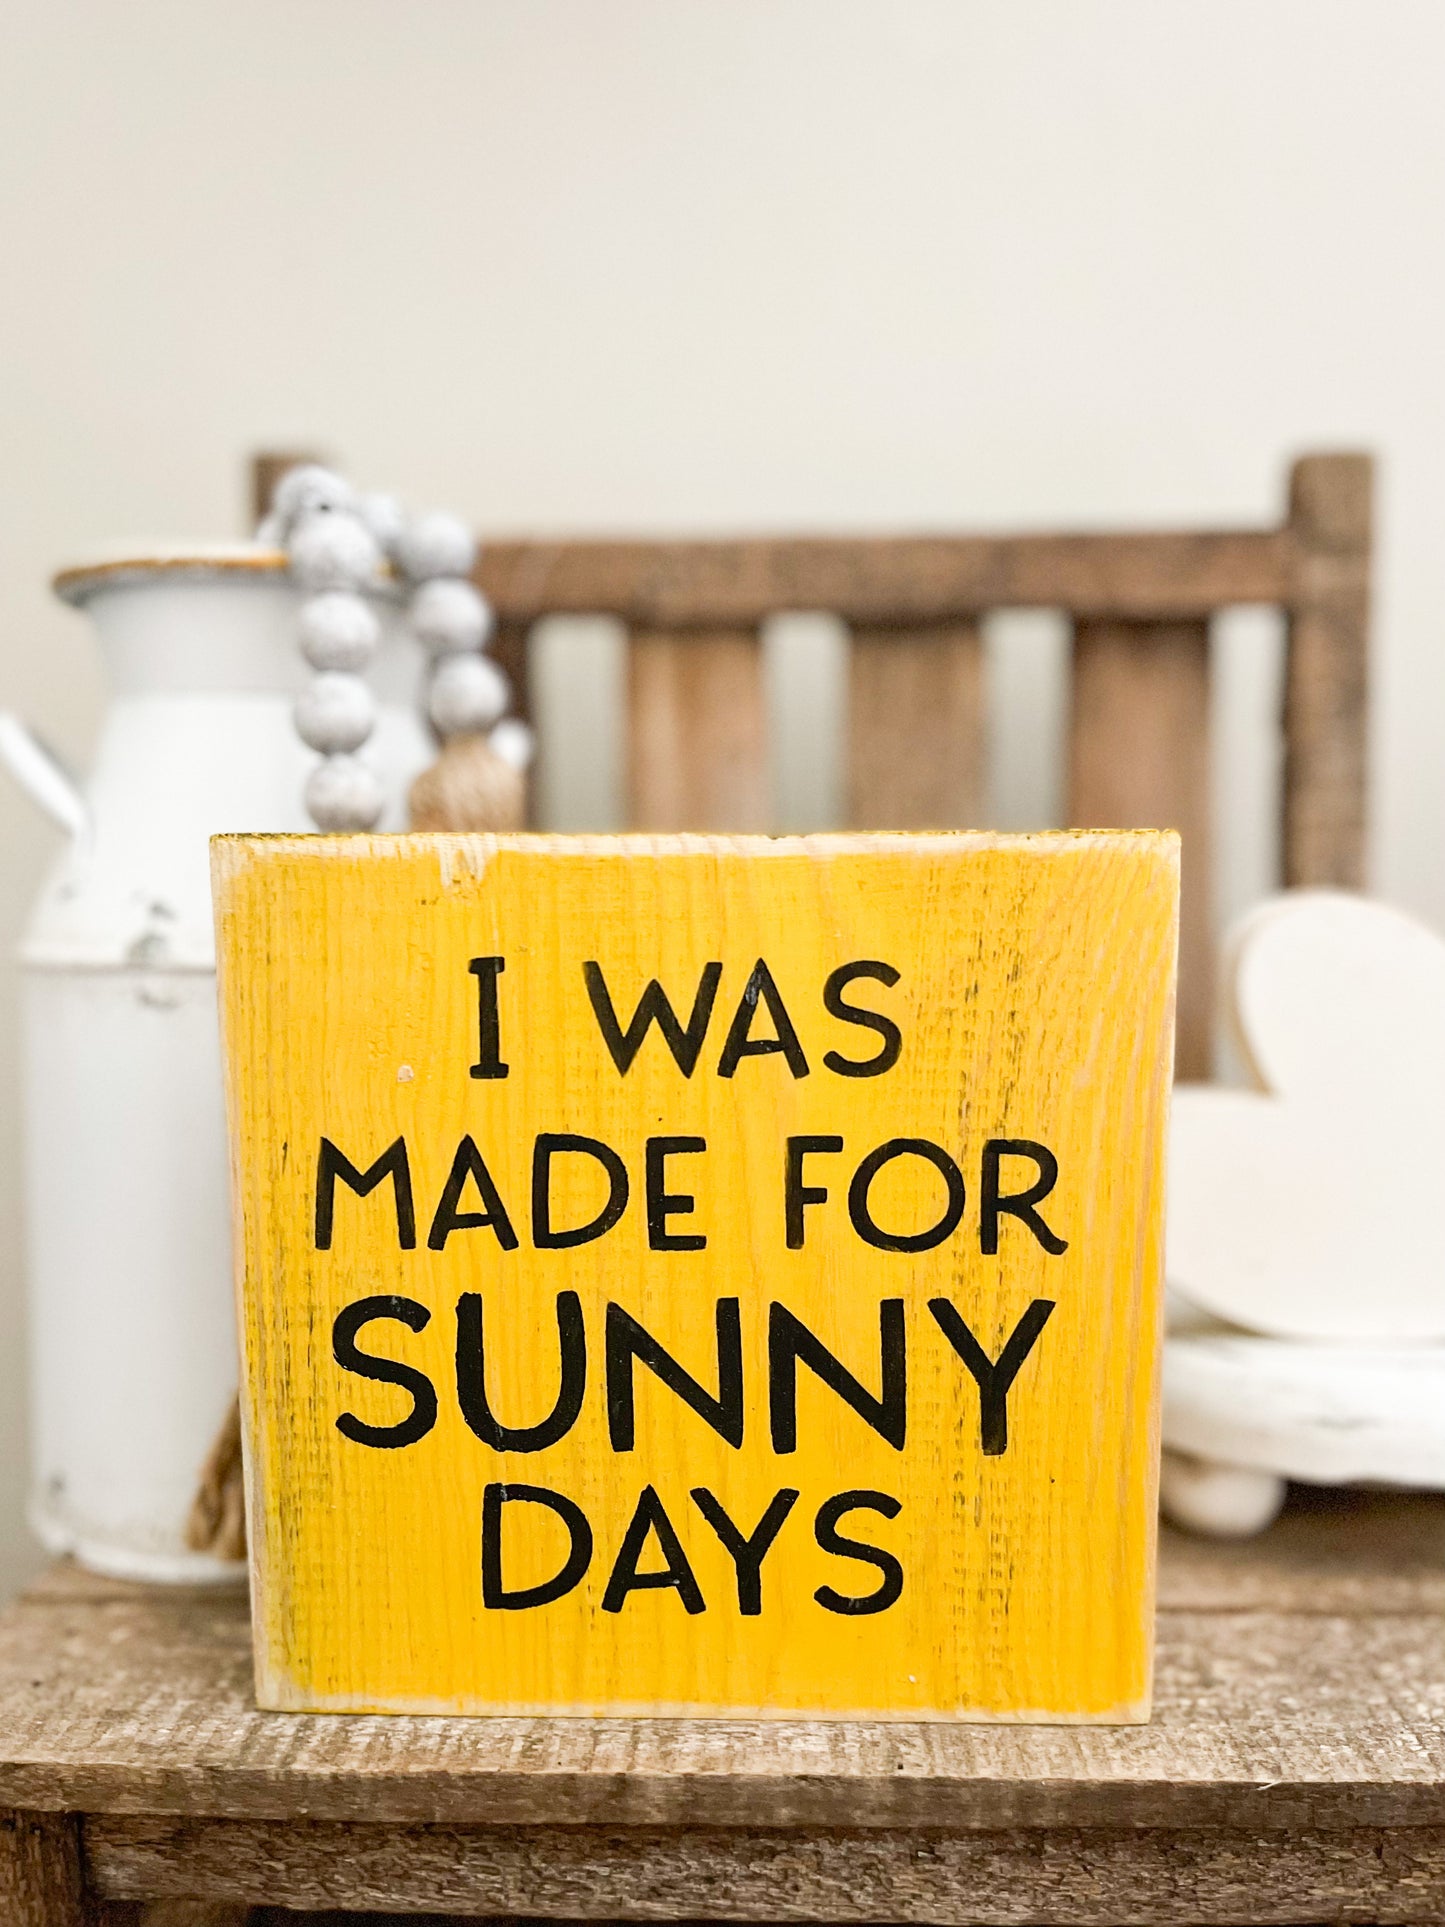 I Was Made For Sunny Days wood sign